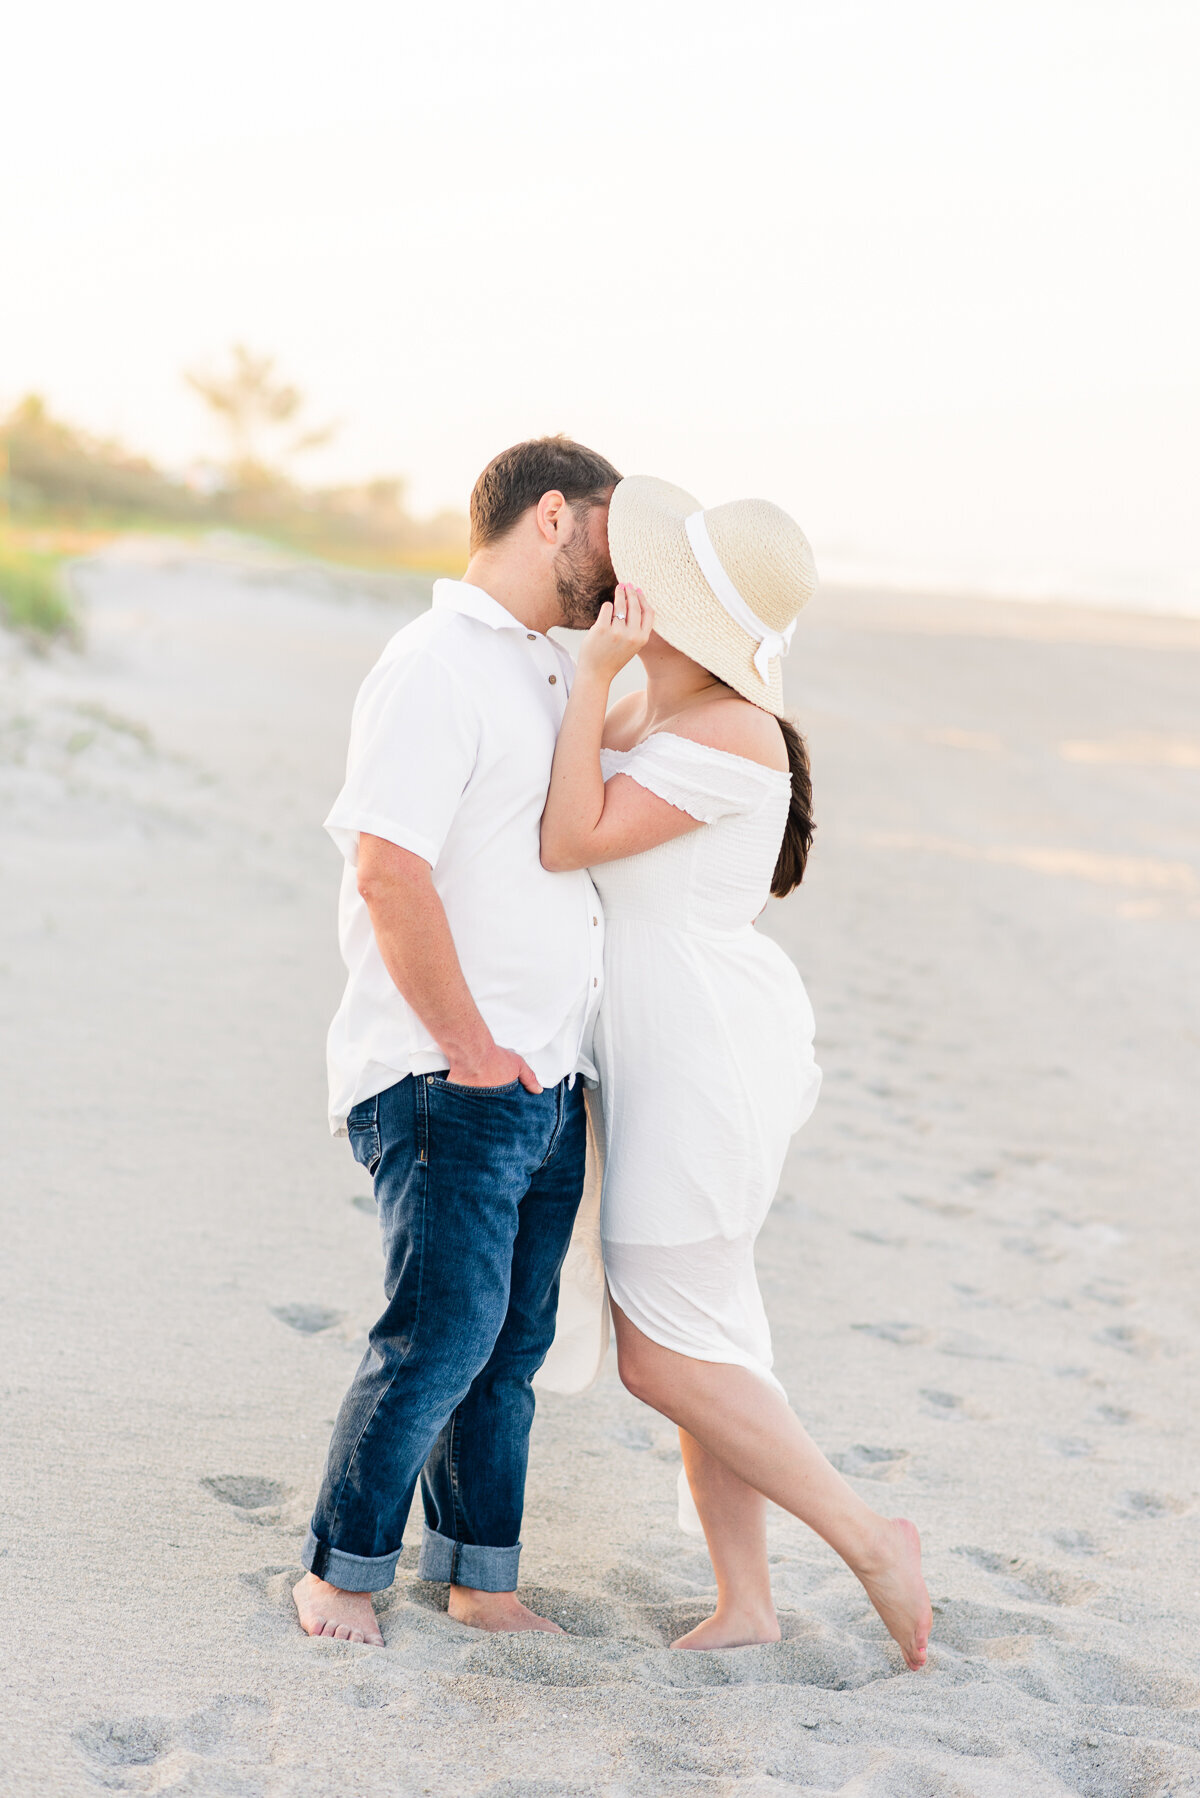 Maddie & Charlie Melbourne Beach Engagement | Lisa Marshall Photography